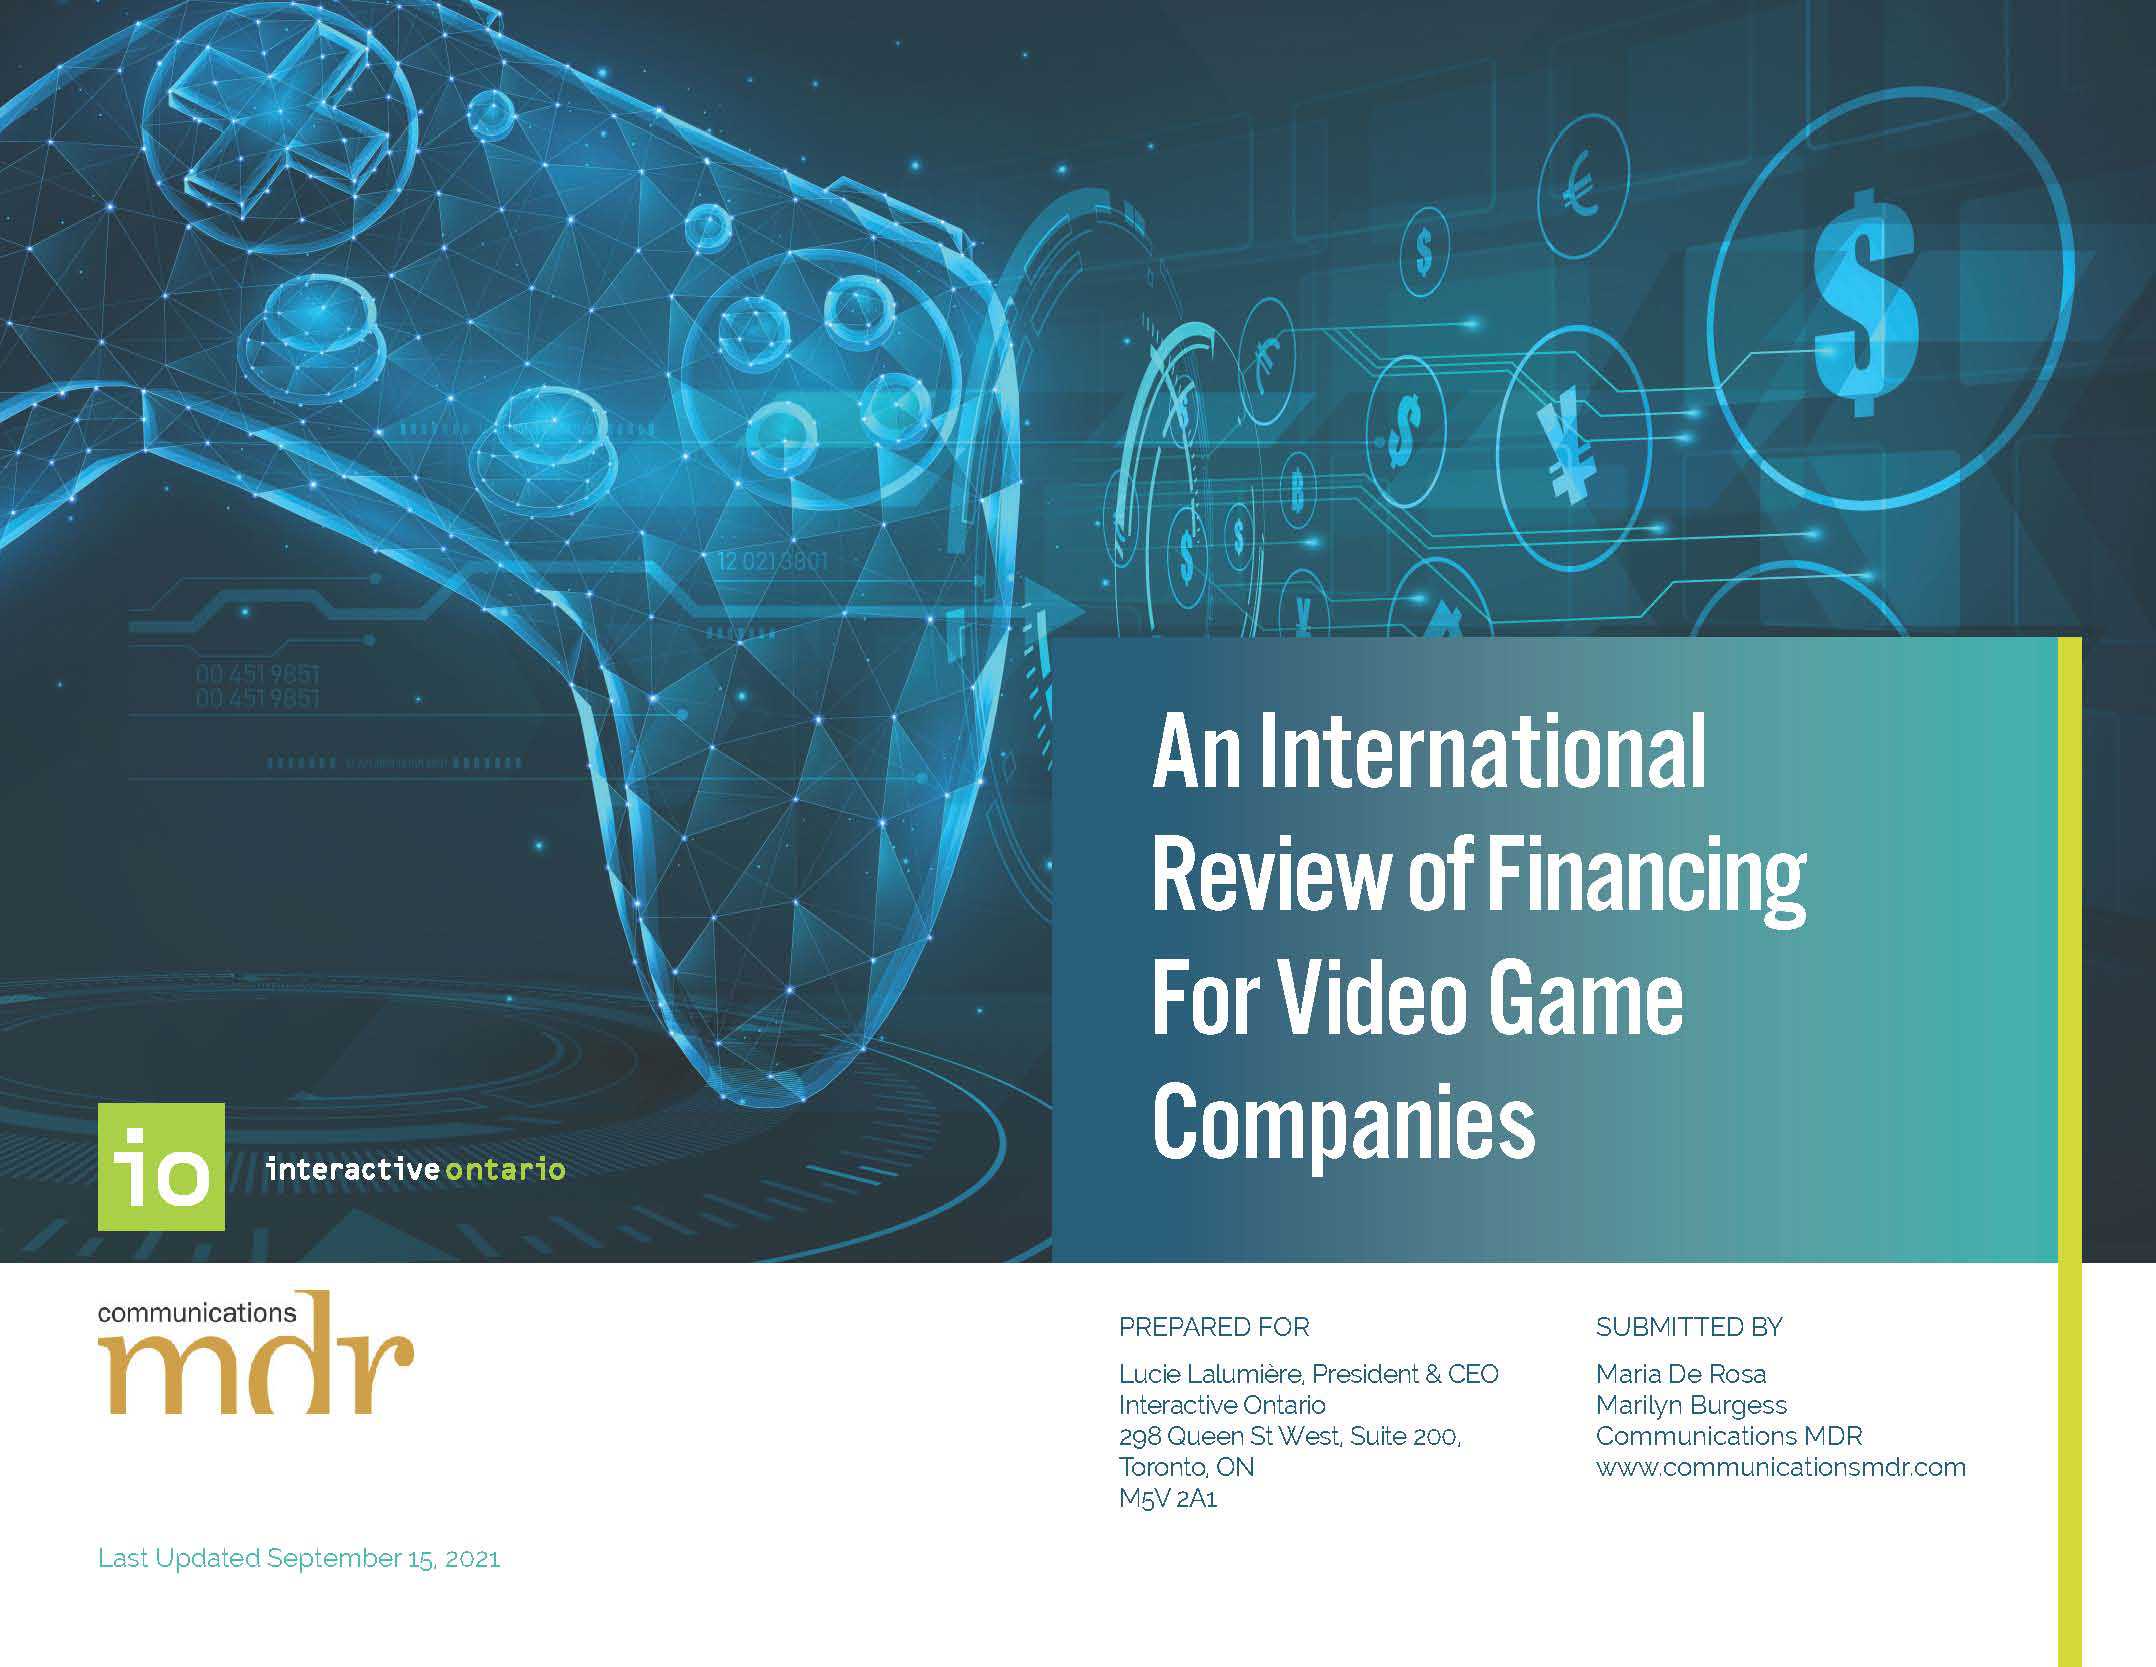 An International Review of Financing For Video Game Companies